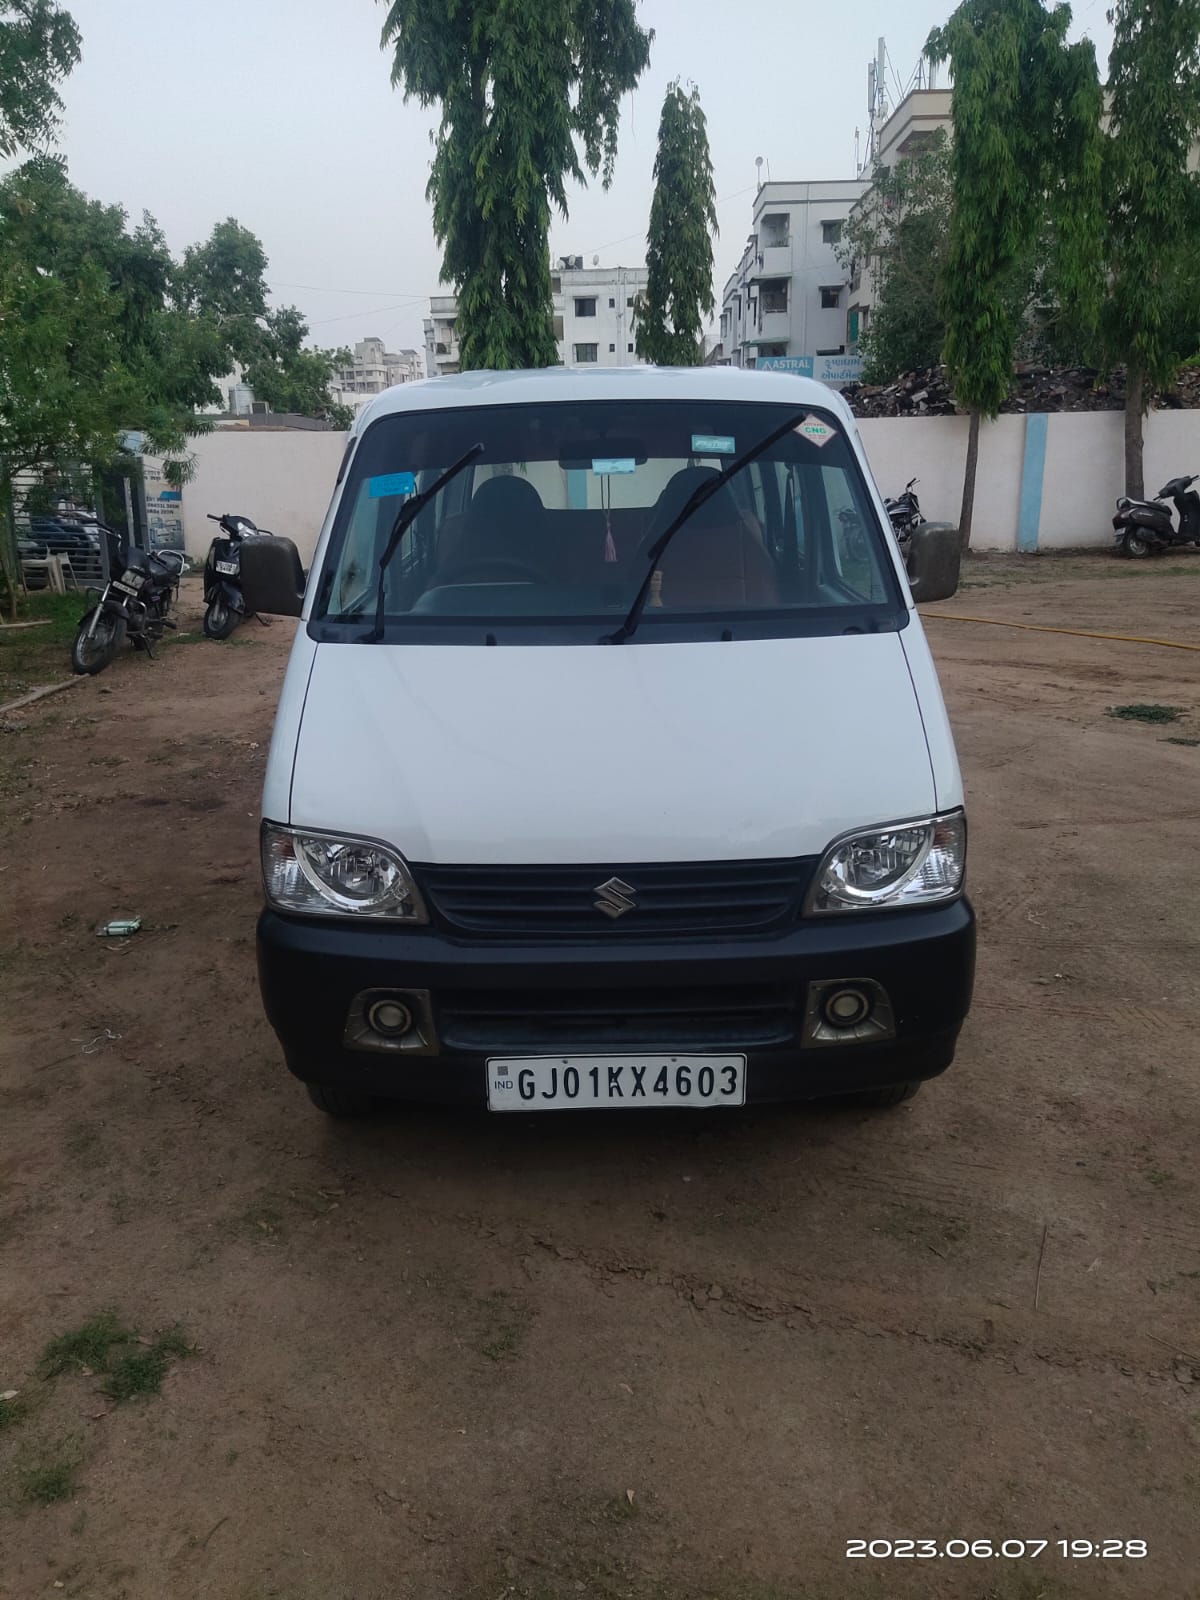 Details View - Maruti Suzuki Eeco photos - reseller,reseller marketplace,advetising your products,reseller bazzar,resellerbazzar.in,india's classified site,Maruti Suzuki Eeco , Old Maruti Suzuki Eeco, Used Maruti Suzuki Eeco in Ahmedabad ,Maruti Suzuki Eeco in Ahmedabad